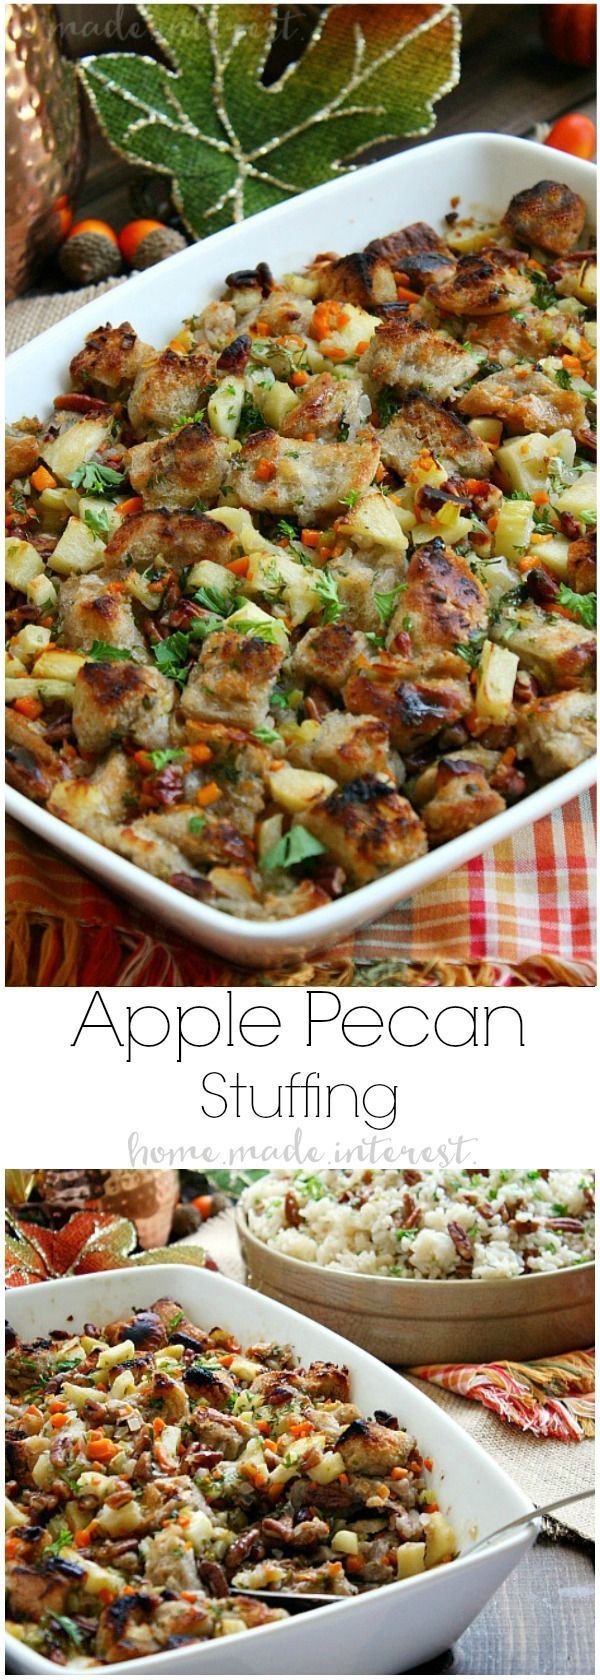 This Apple Pecan Stuffing recipe is a delicious blend of buttery bread cubes, apples, and pecans. Make this Thanksgiving stuffing